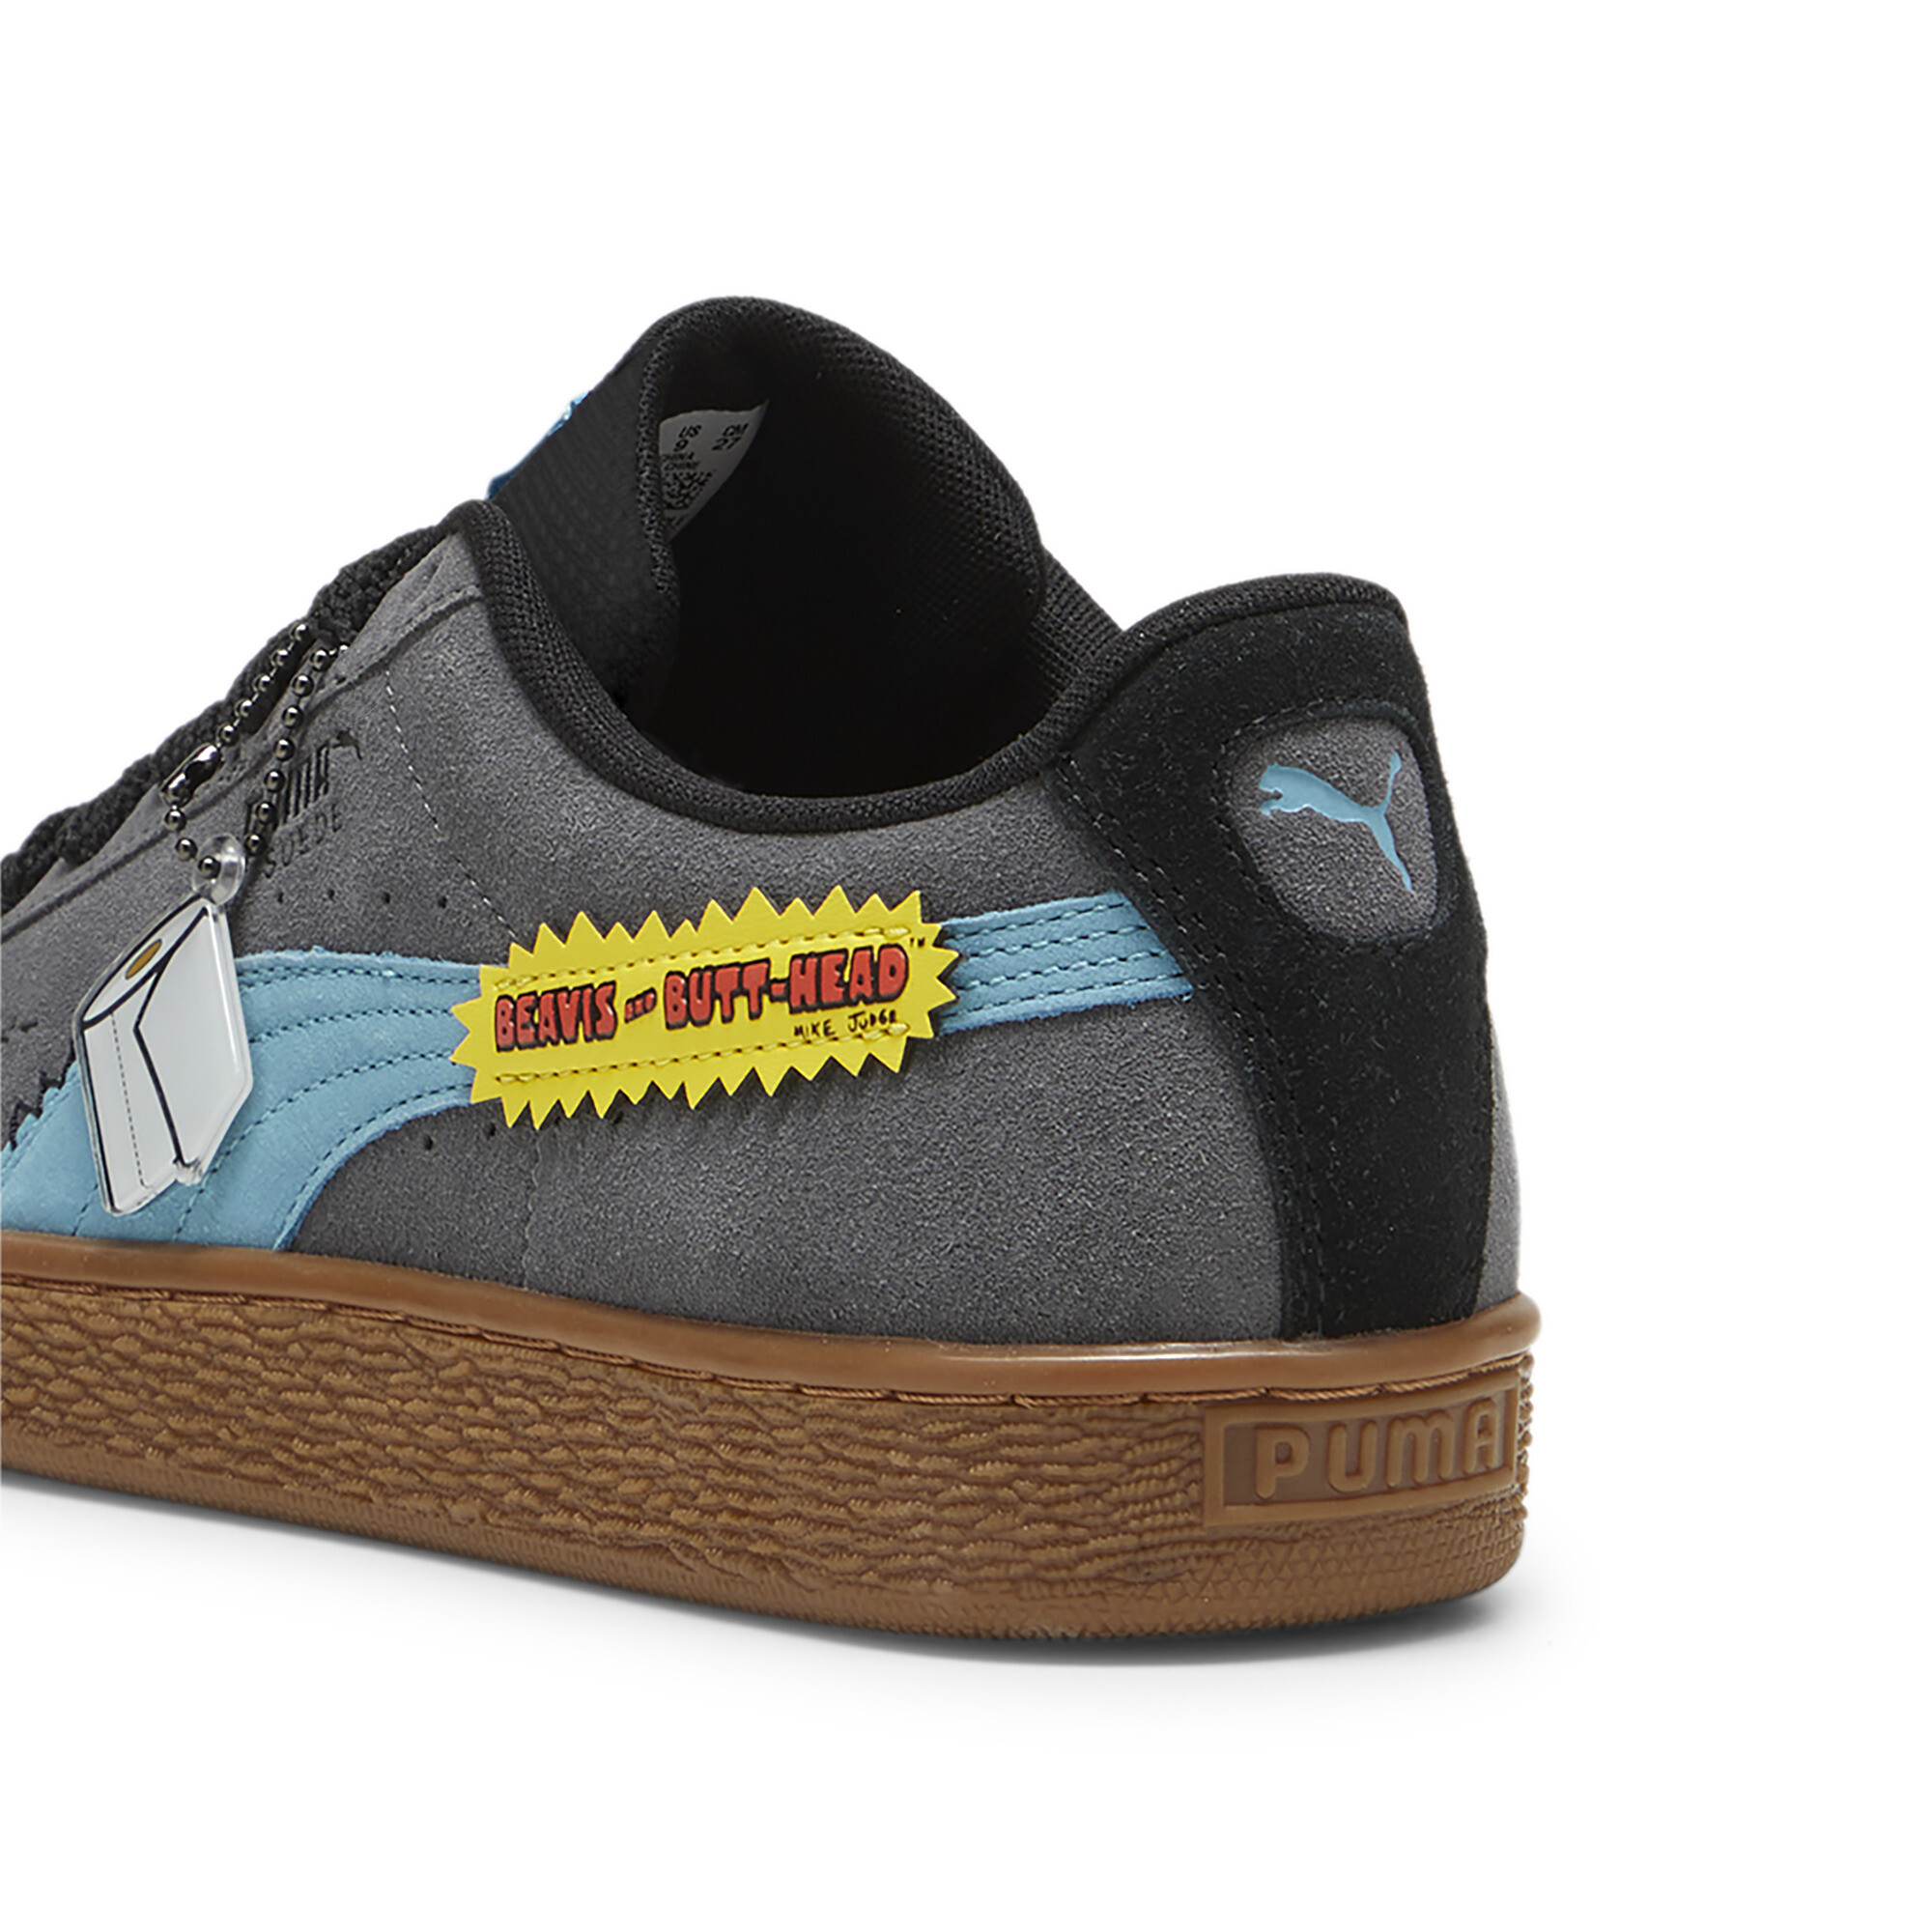 Men's Puma X BEAVIS AND BUTTHEAD Suede Sneakers, Gray, Size 37.5, Shoes